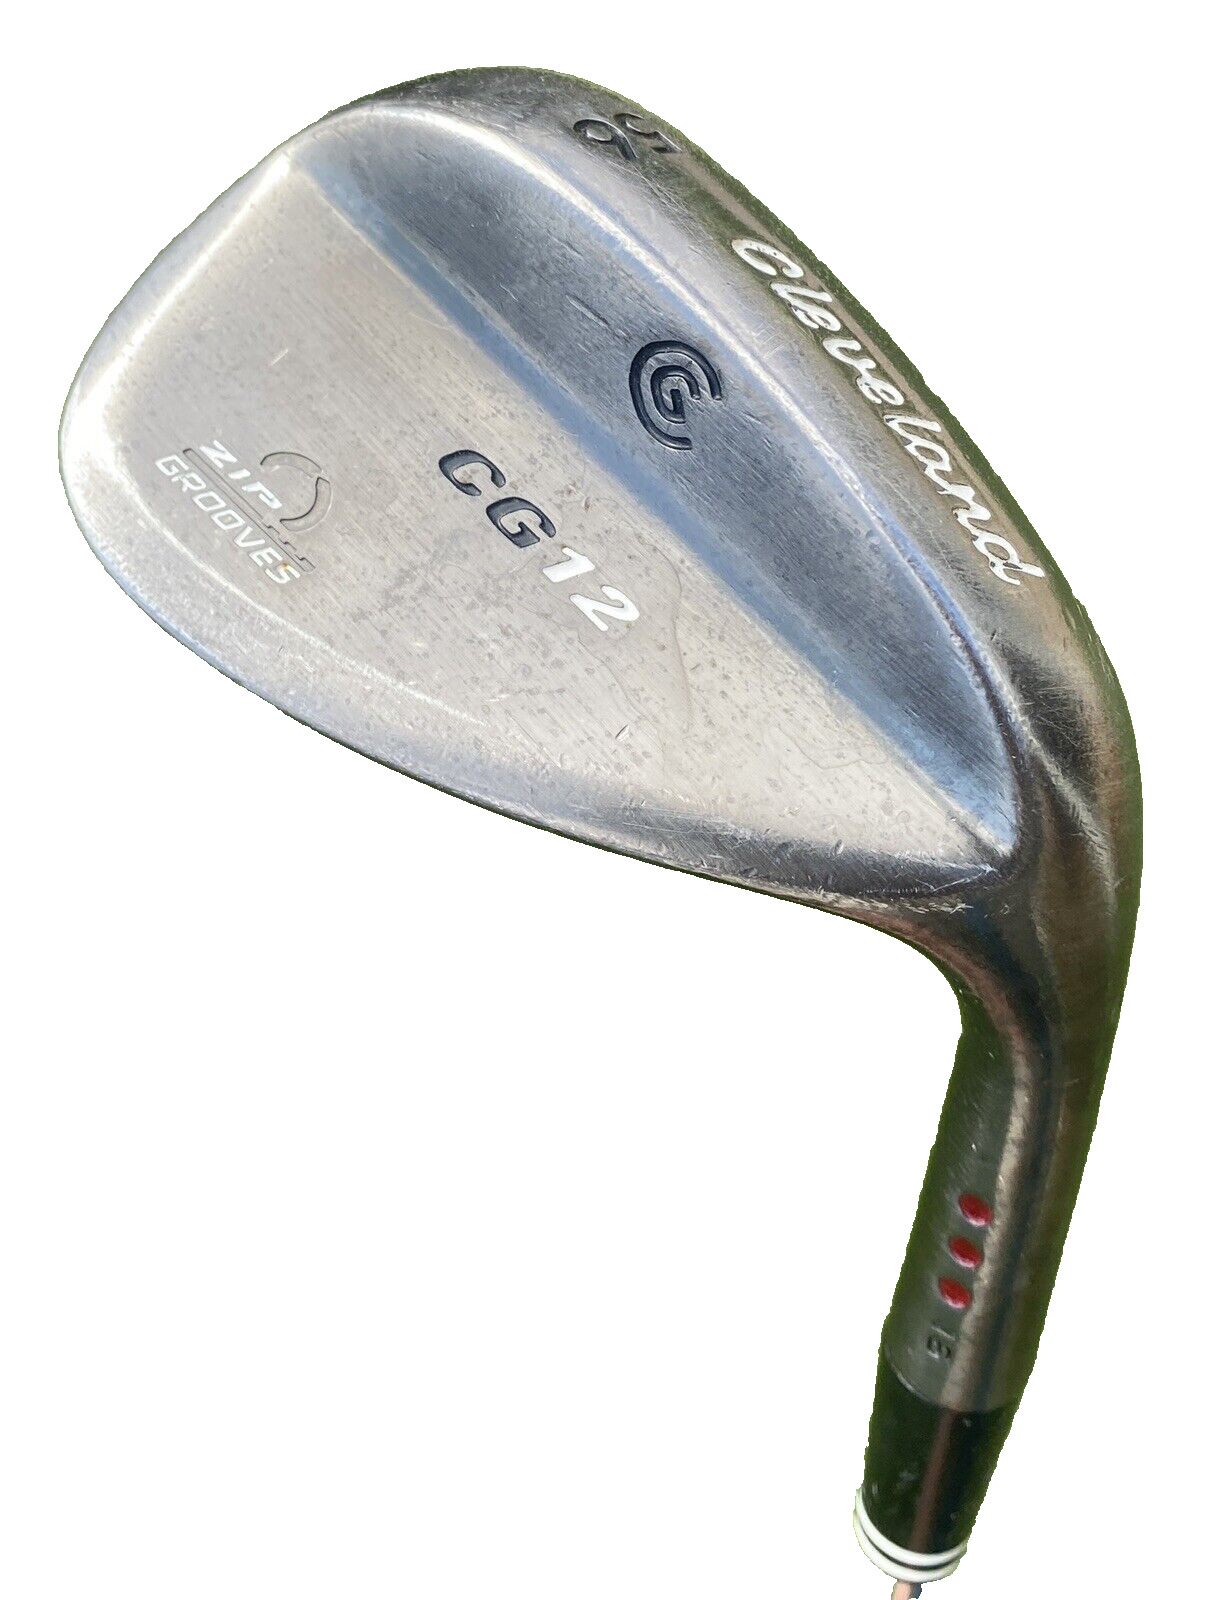 Cleveland CG12 56° Sand Wedge/15° Bounce RH Steel Shaft Wedge Flex Pre-Owned